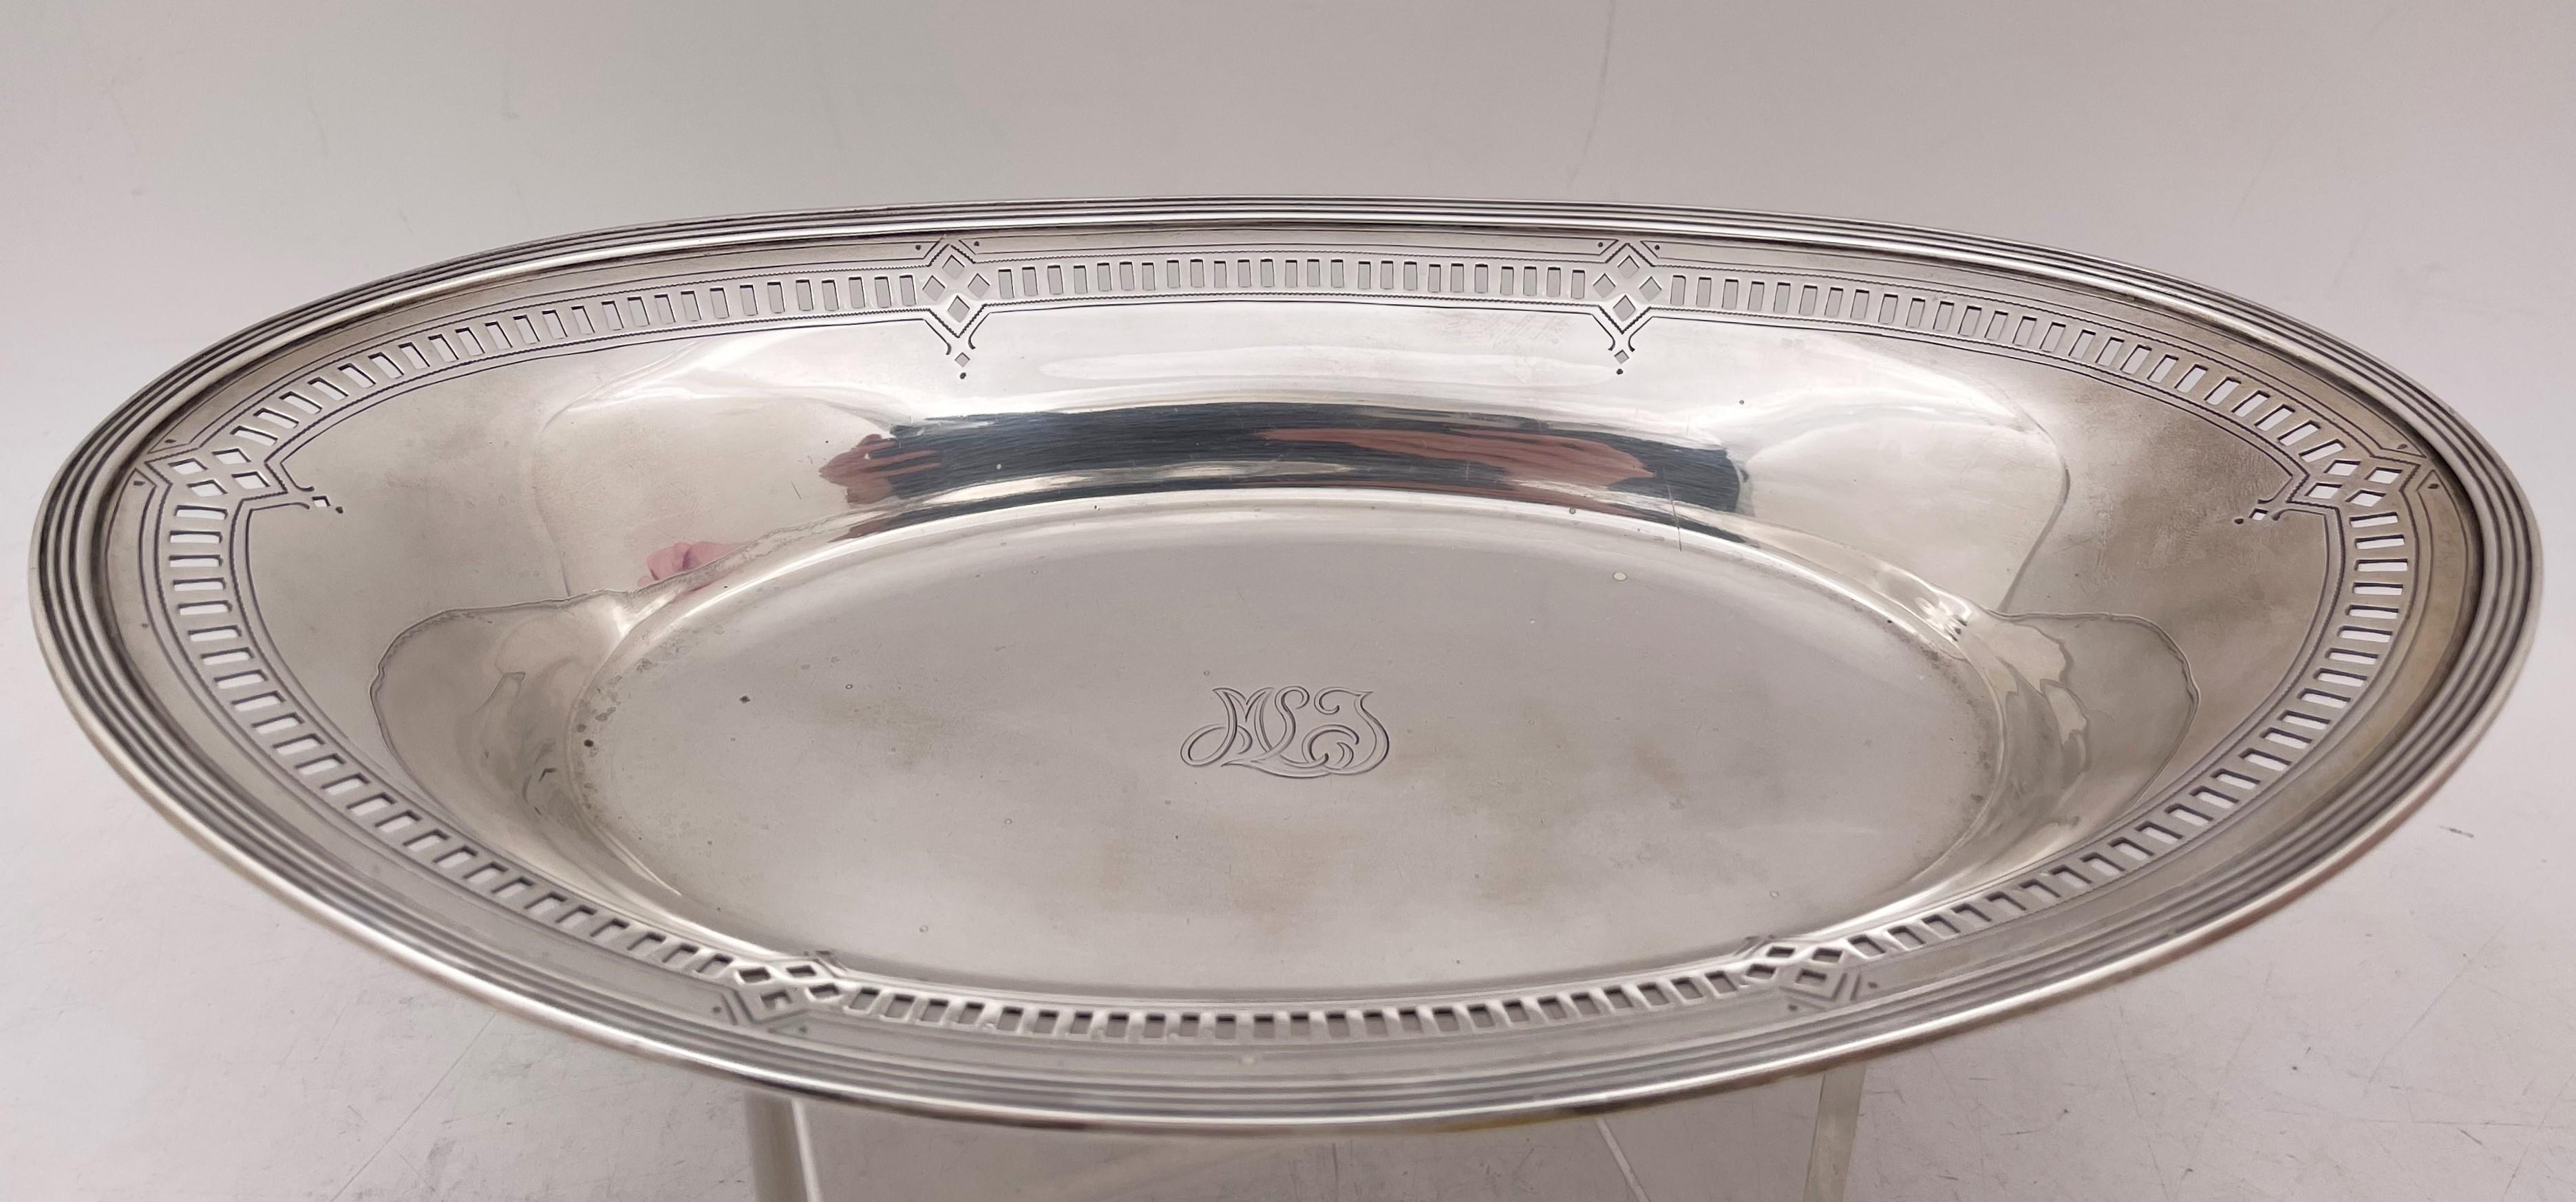 Tiffany & Co. sterling silver bread dish in Art Deco style and in pattern number 17780A from 1910 with a pierced rim, and an elegant, oval-shaped design. It measures 11 1/2'' in length by 6 3/4'' in width by 1 3/4'' in height, weighs 13.9 troy